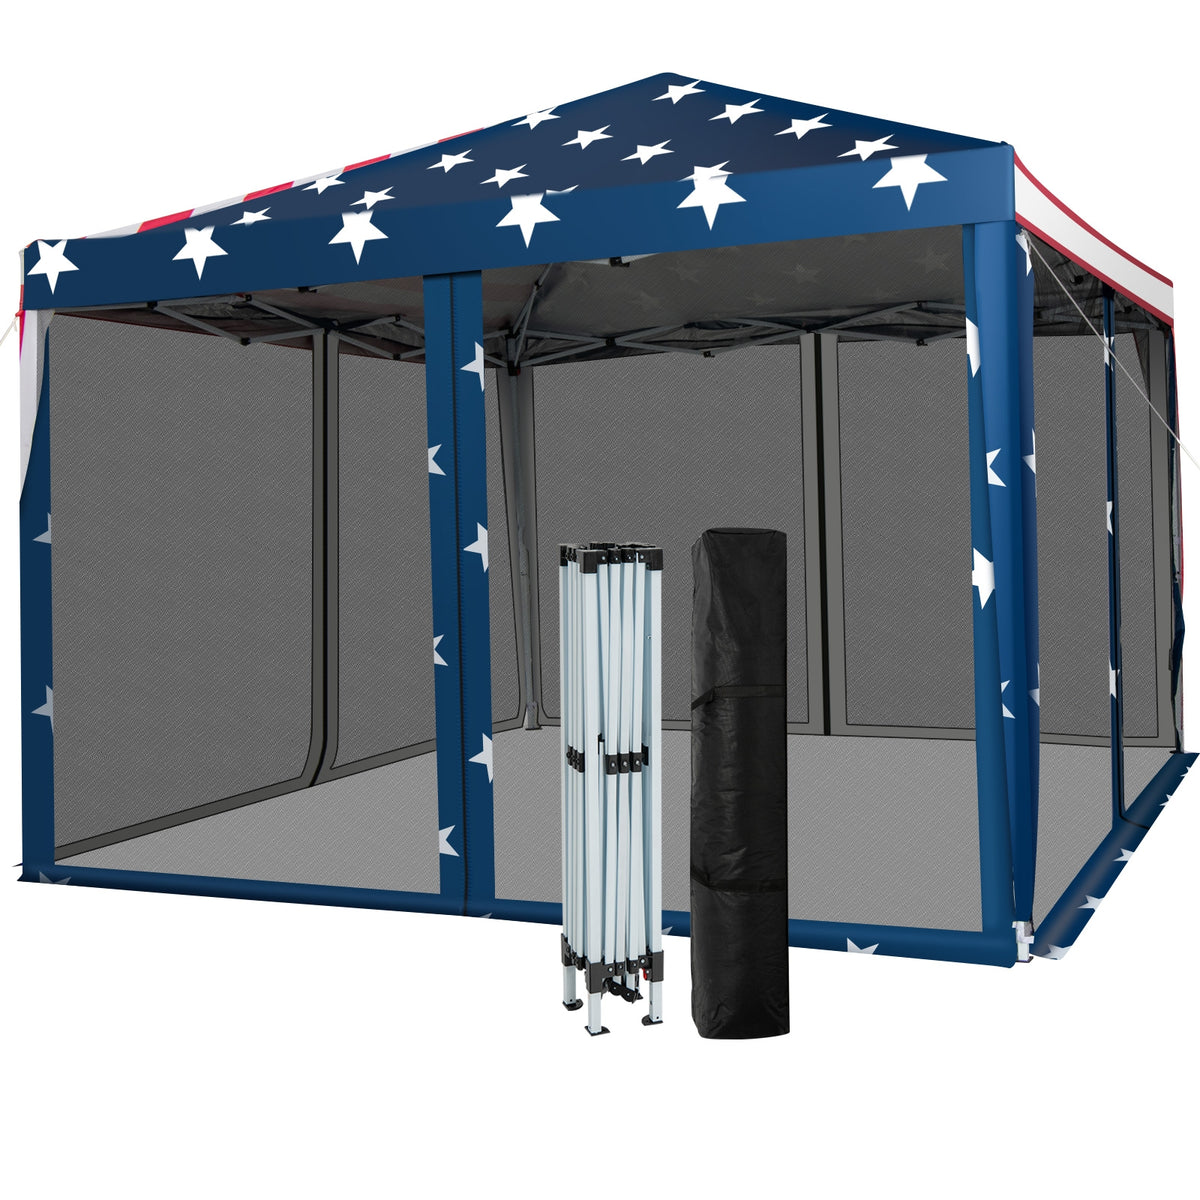 Hikidspace Outdoor 10’ x 10’ Pop-up Canopy Tent Gazebo Canopy